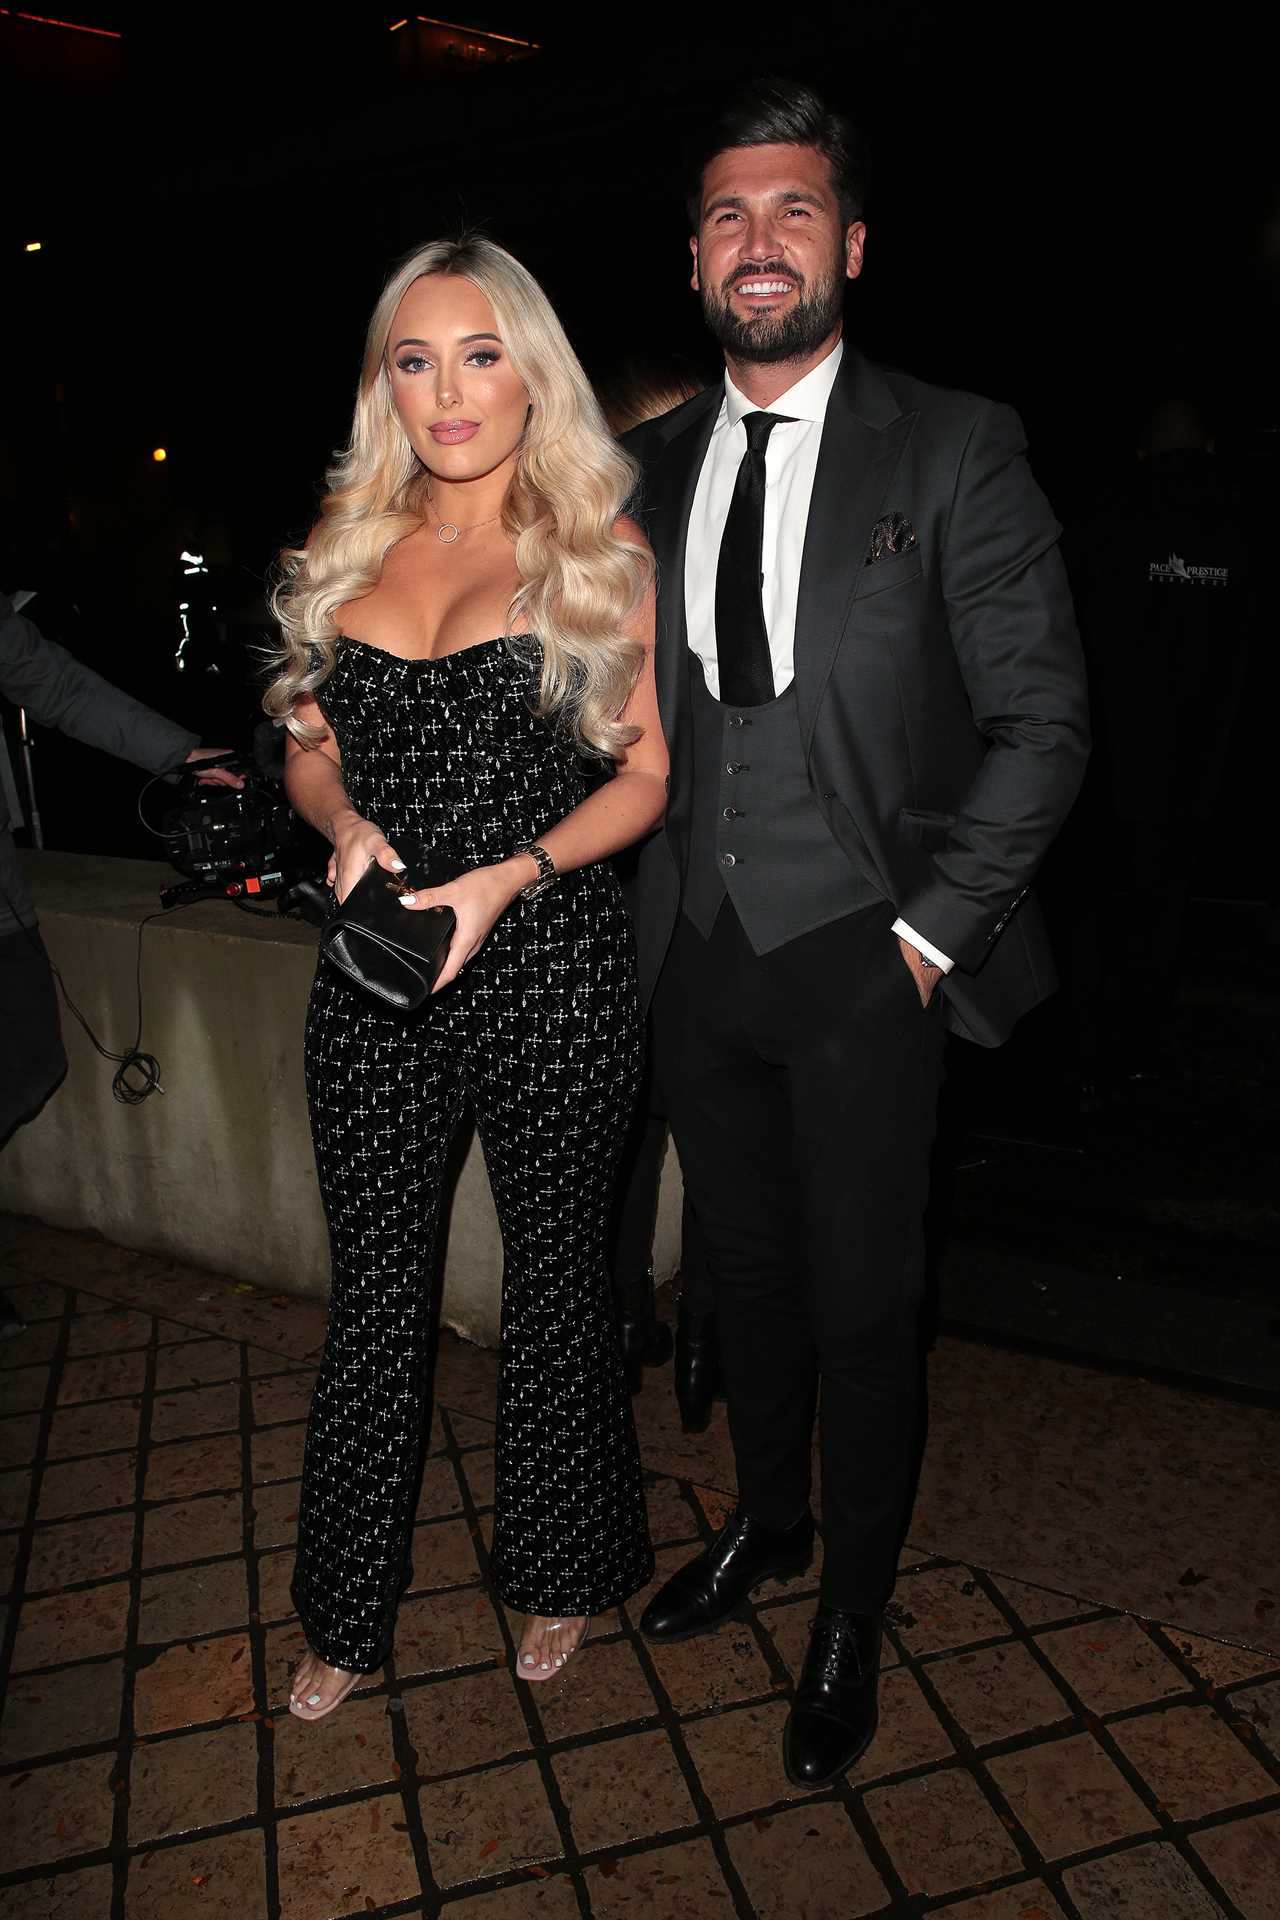 Towie’s Amber Turner goes braless in white dress as she shows Dan Edgar what he’s missing